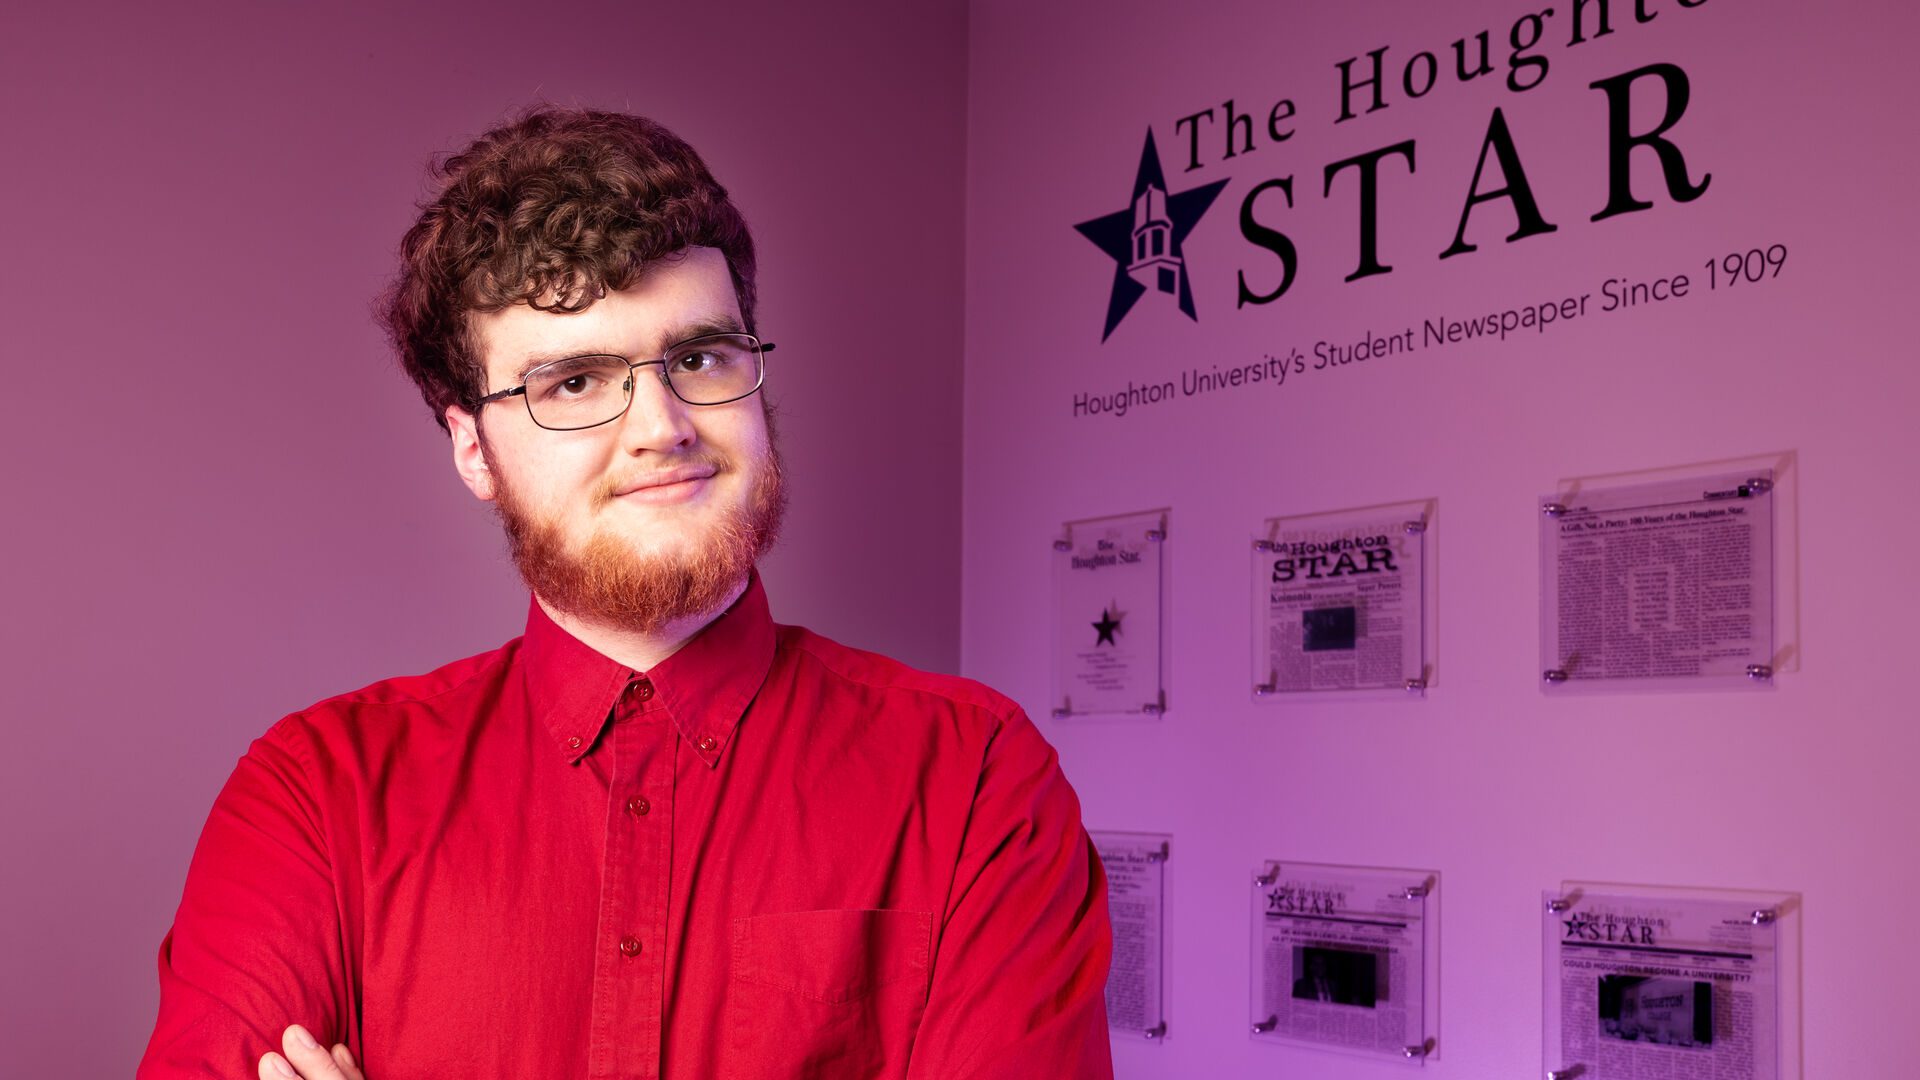 Houghton student Christian Welker standing by The Houghton STAR entry wall.